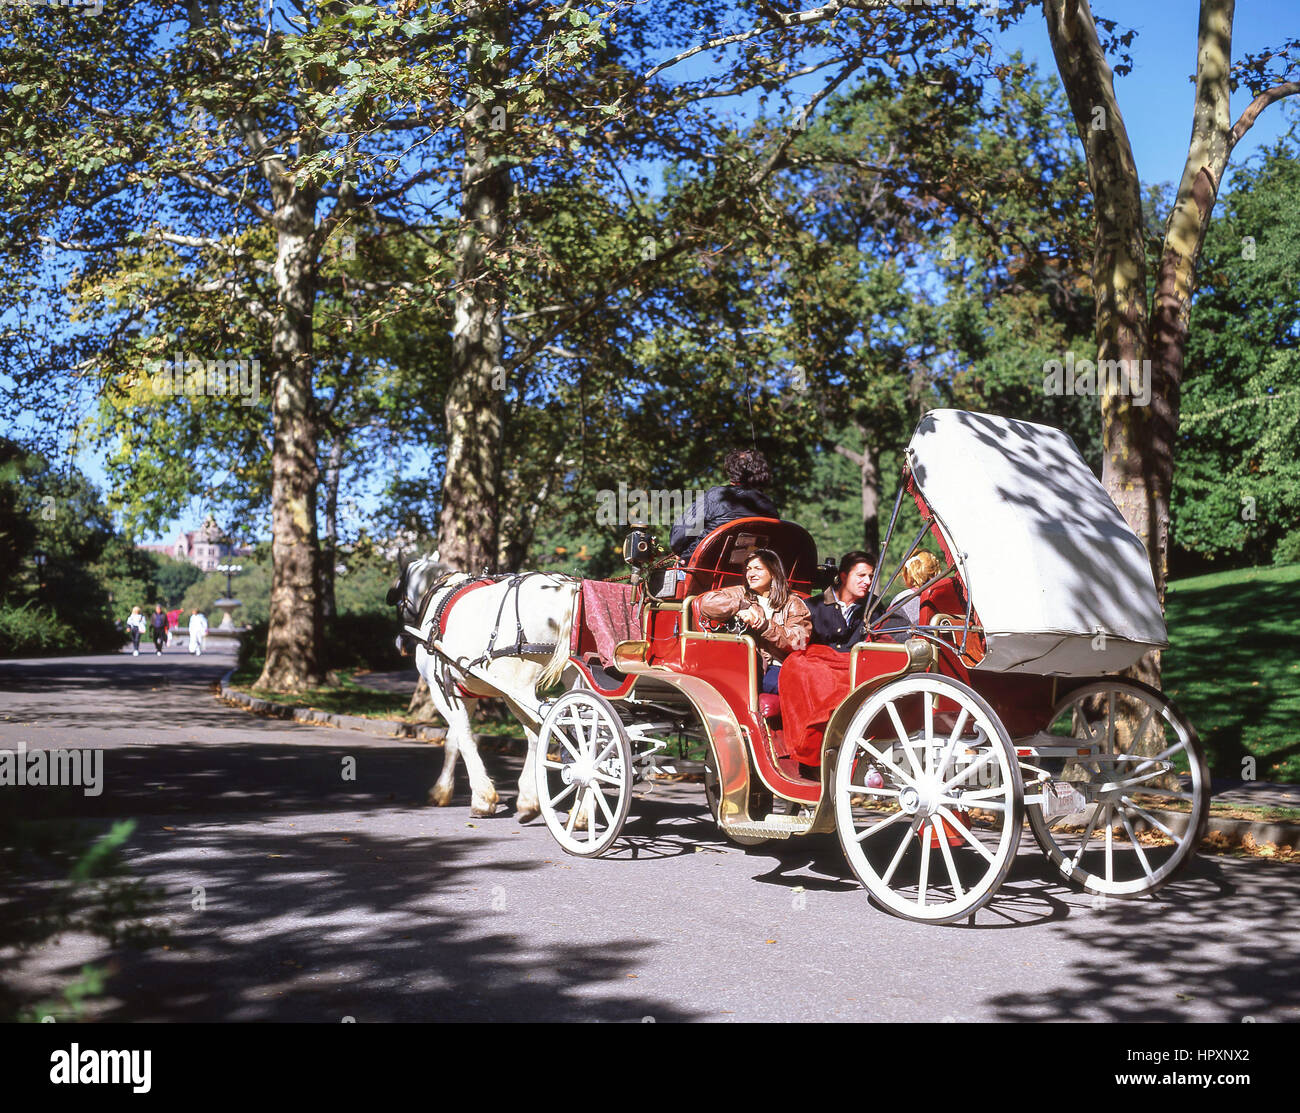 Horse carriage ride, Central Park, Manhattan, New York, New York State, United States of America Stock Photo